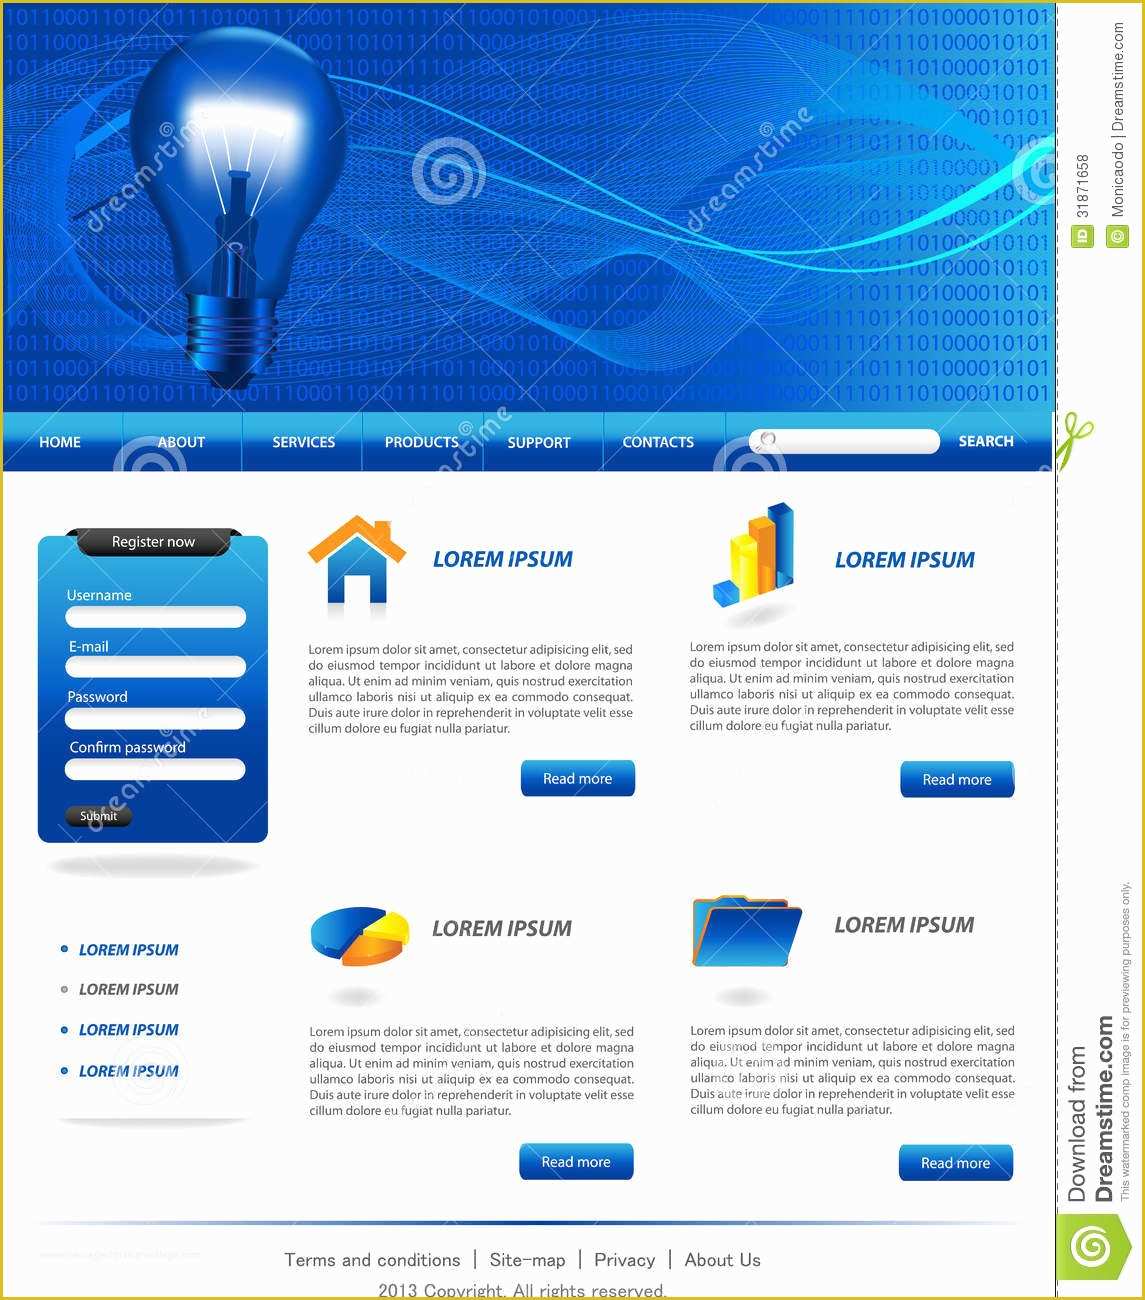 Copyright Free Website Templates Of Business Website Templates Royalty Free Stock S